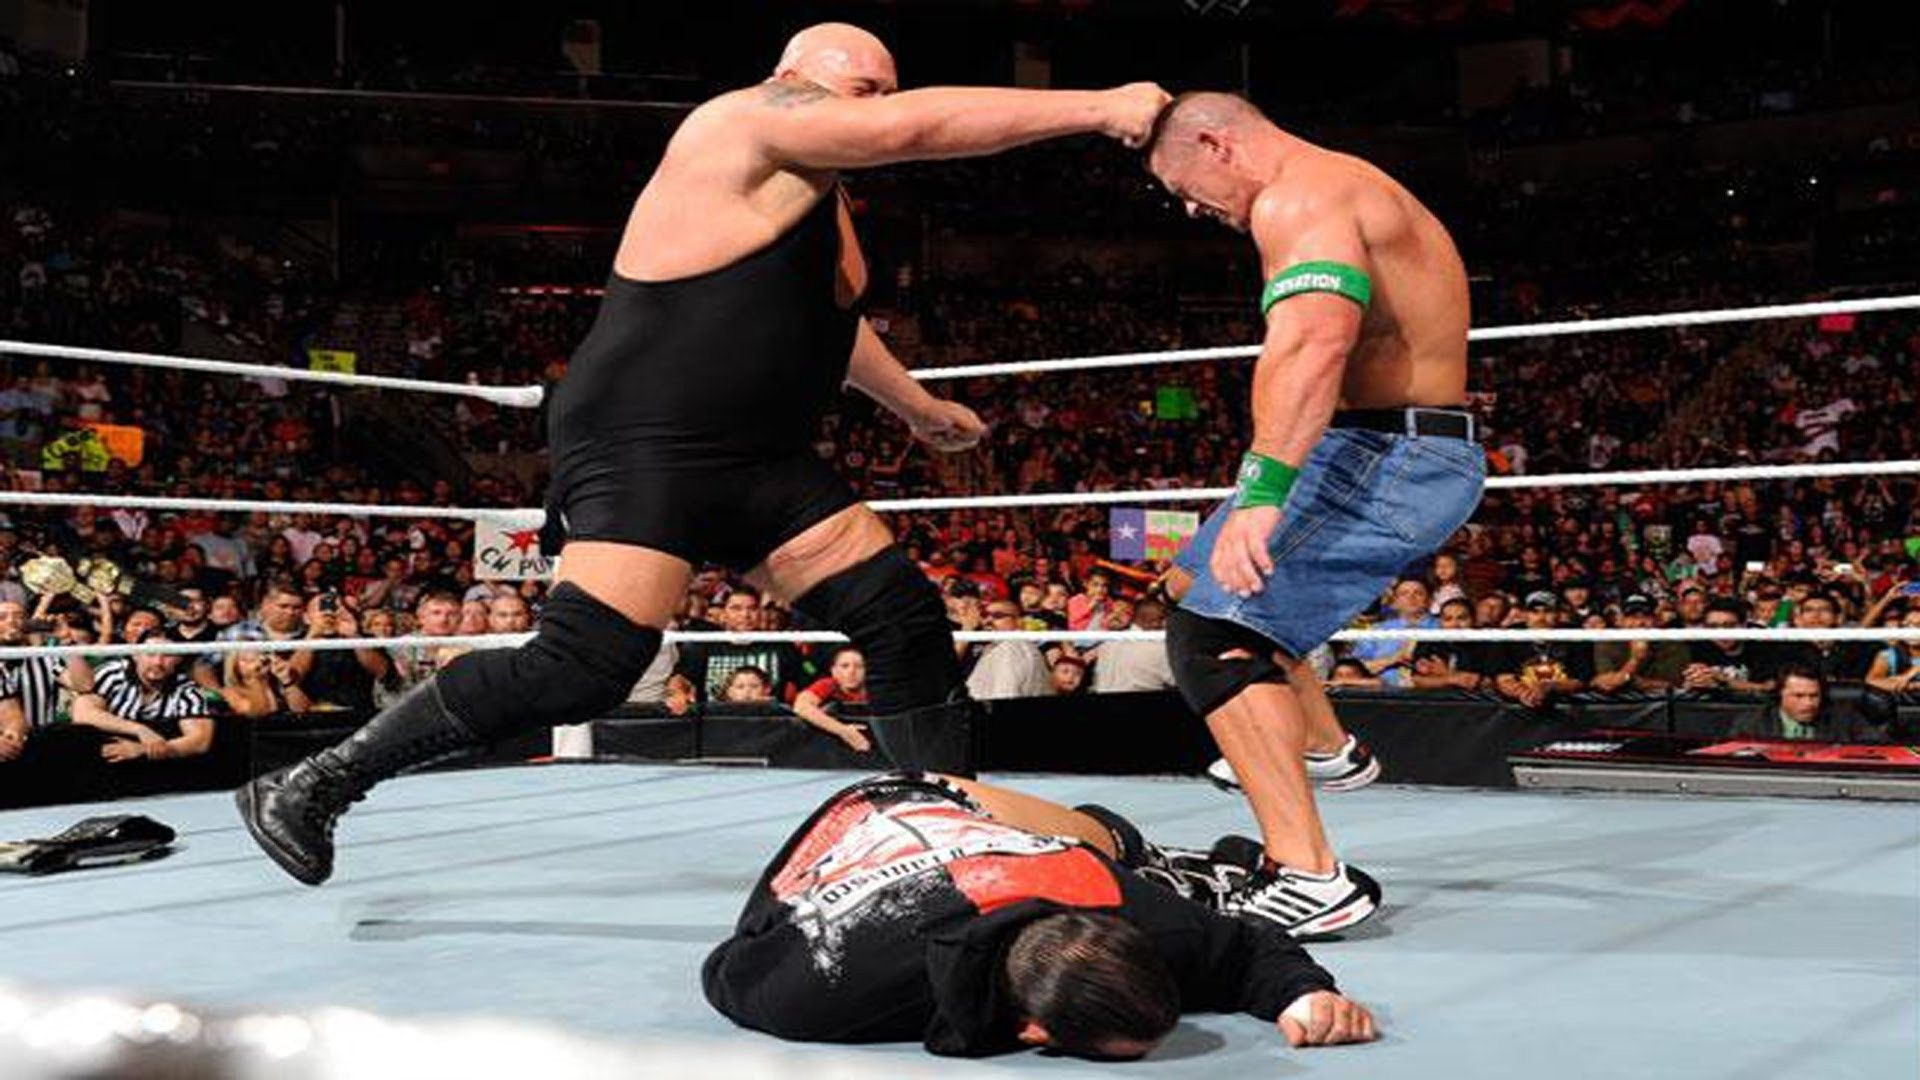 Big Show and John Cena Fight in WWE HD Wallpaper of Wrestler. HD Wallpaper, Image, Picture, Photo. Big show, Famous wrestlers, John cena